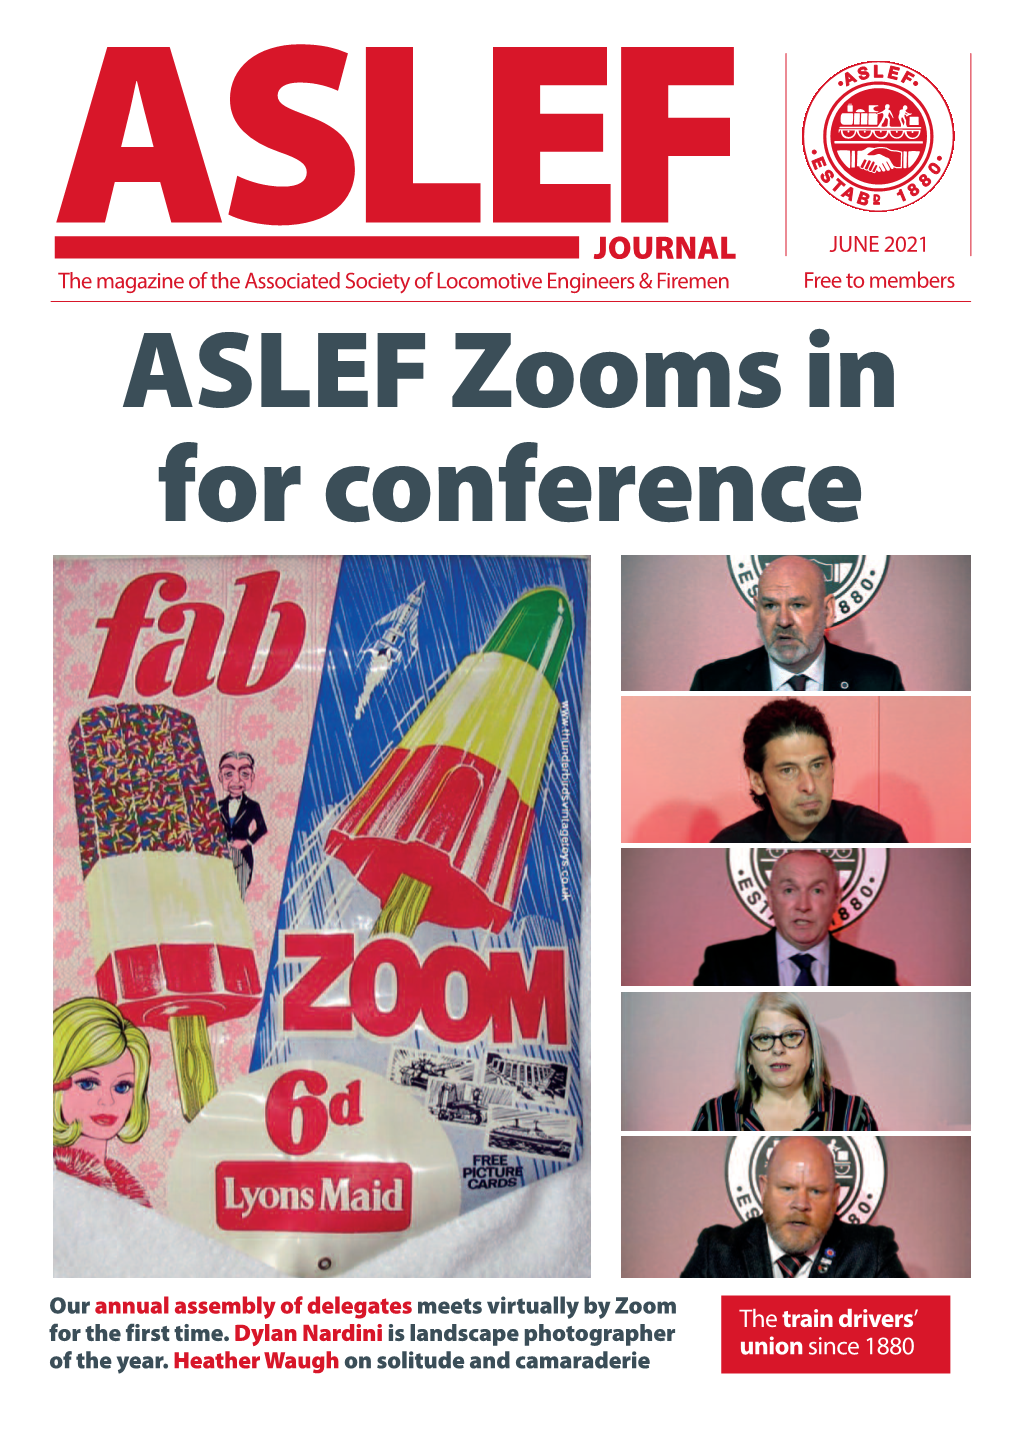 ASLEF Zooms in for Conference